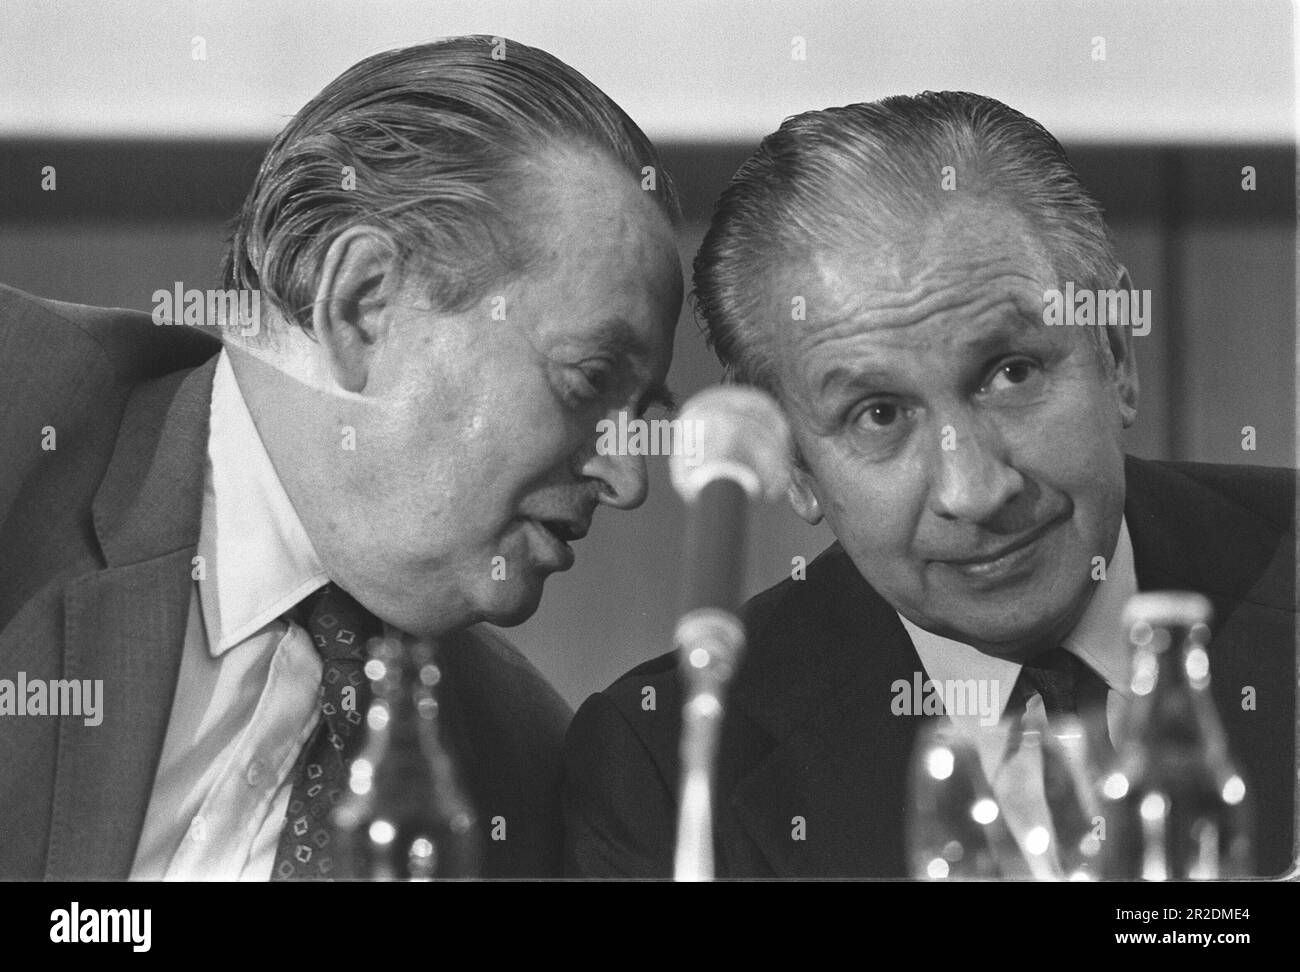 ARCHIVE PHOTO: Former NOC President Willi DAUME would have turned 110 on May 24, 2023, NOK President Willi DAUME (left), Germany, in conversation with IOC President Juan Antonio SAMARANCH, Spain, at the 11th Olympic Congress in Baden Baden, 09/25/1981. ? Stock Photo